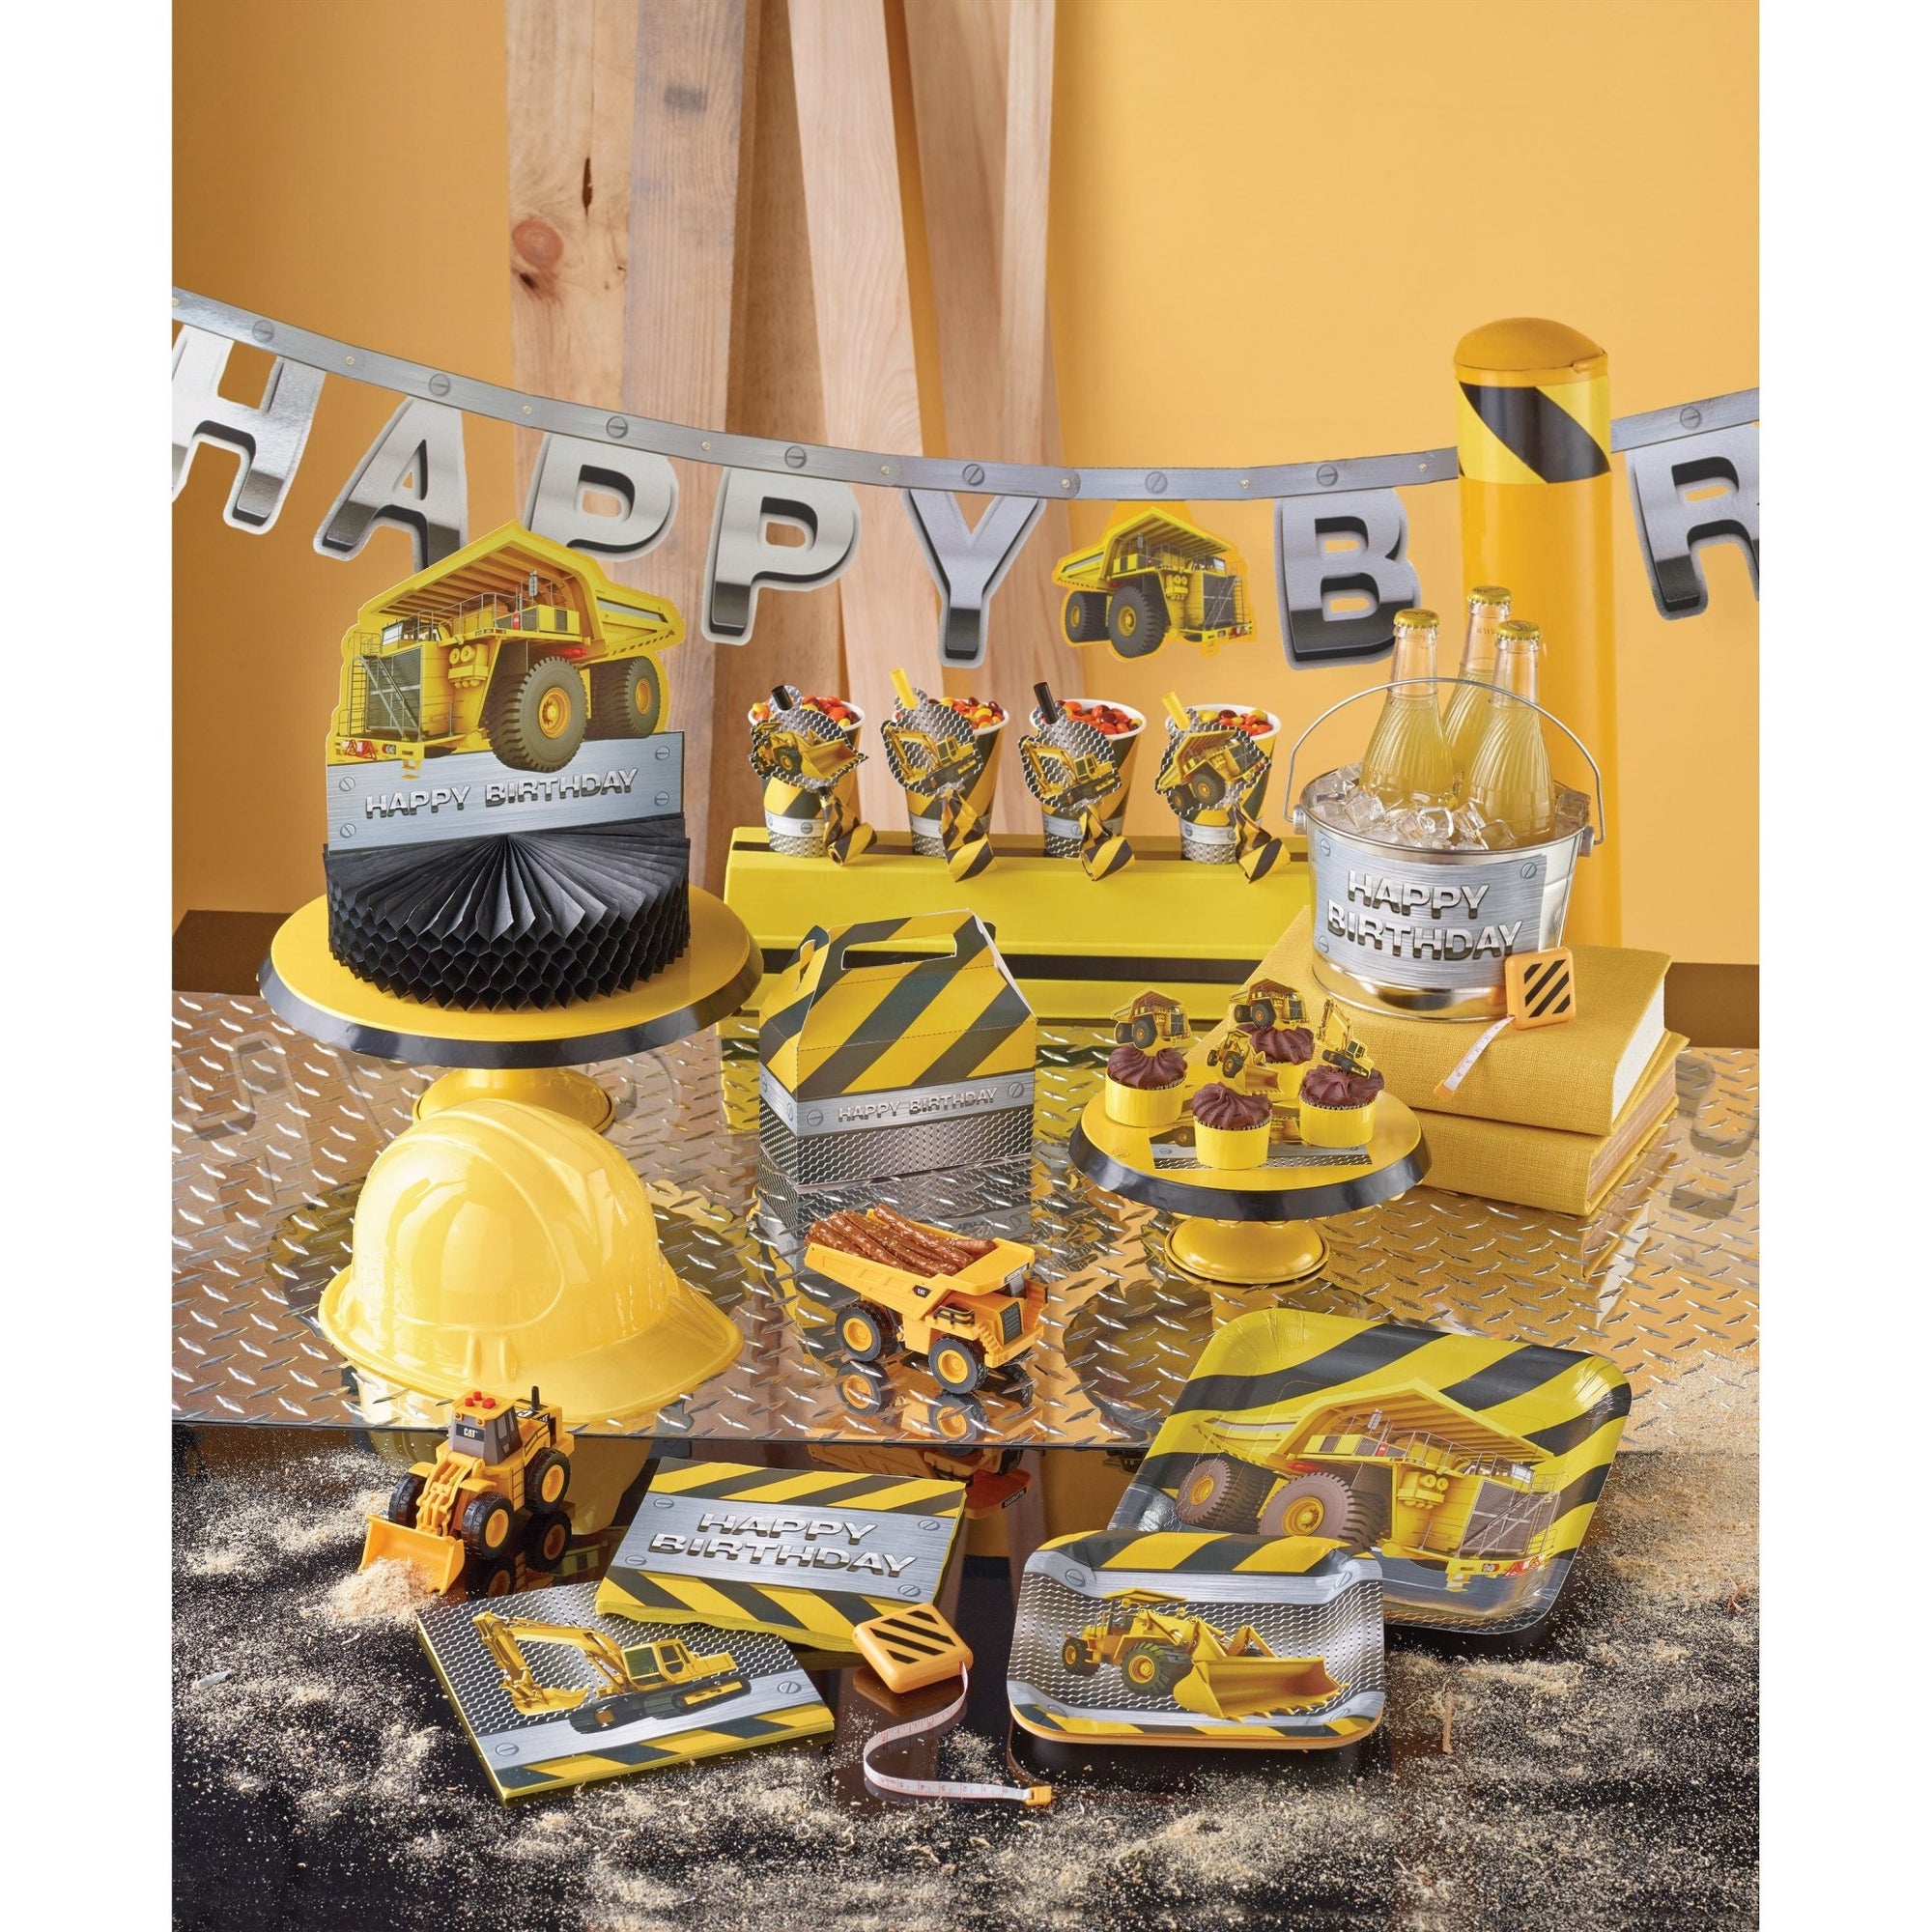 Construction Themed Party Favor Box - Stesha Party